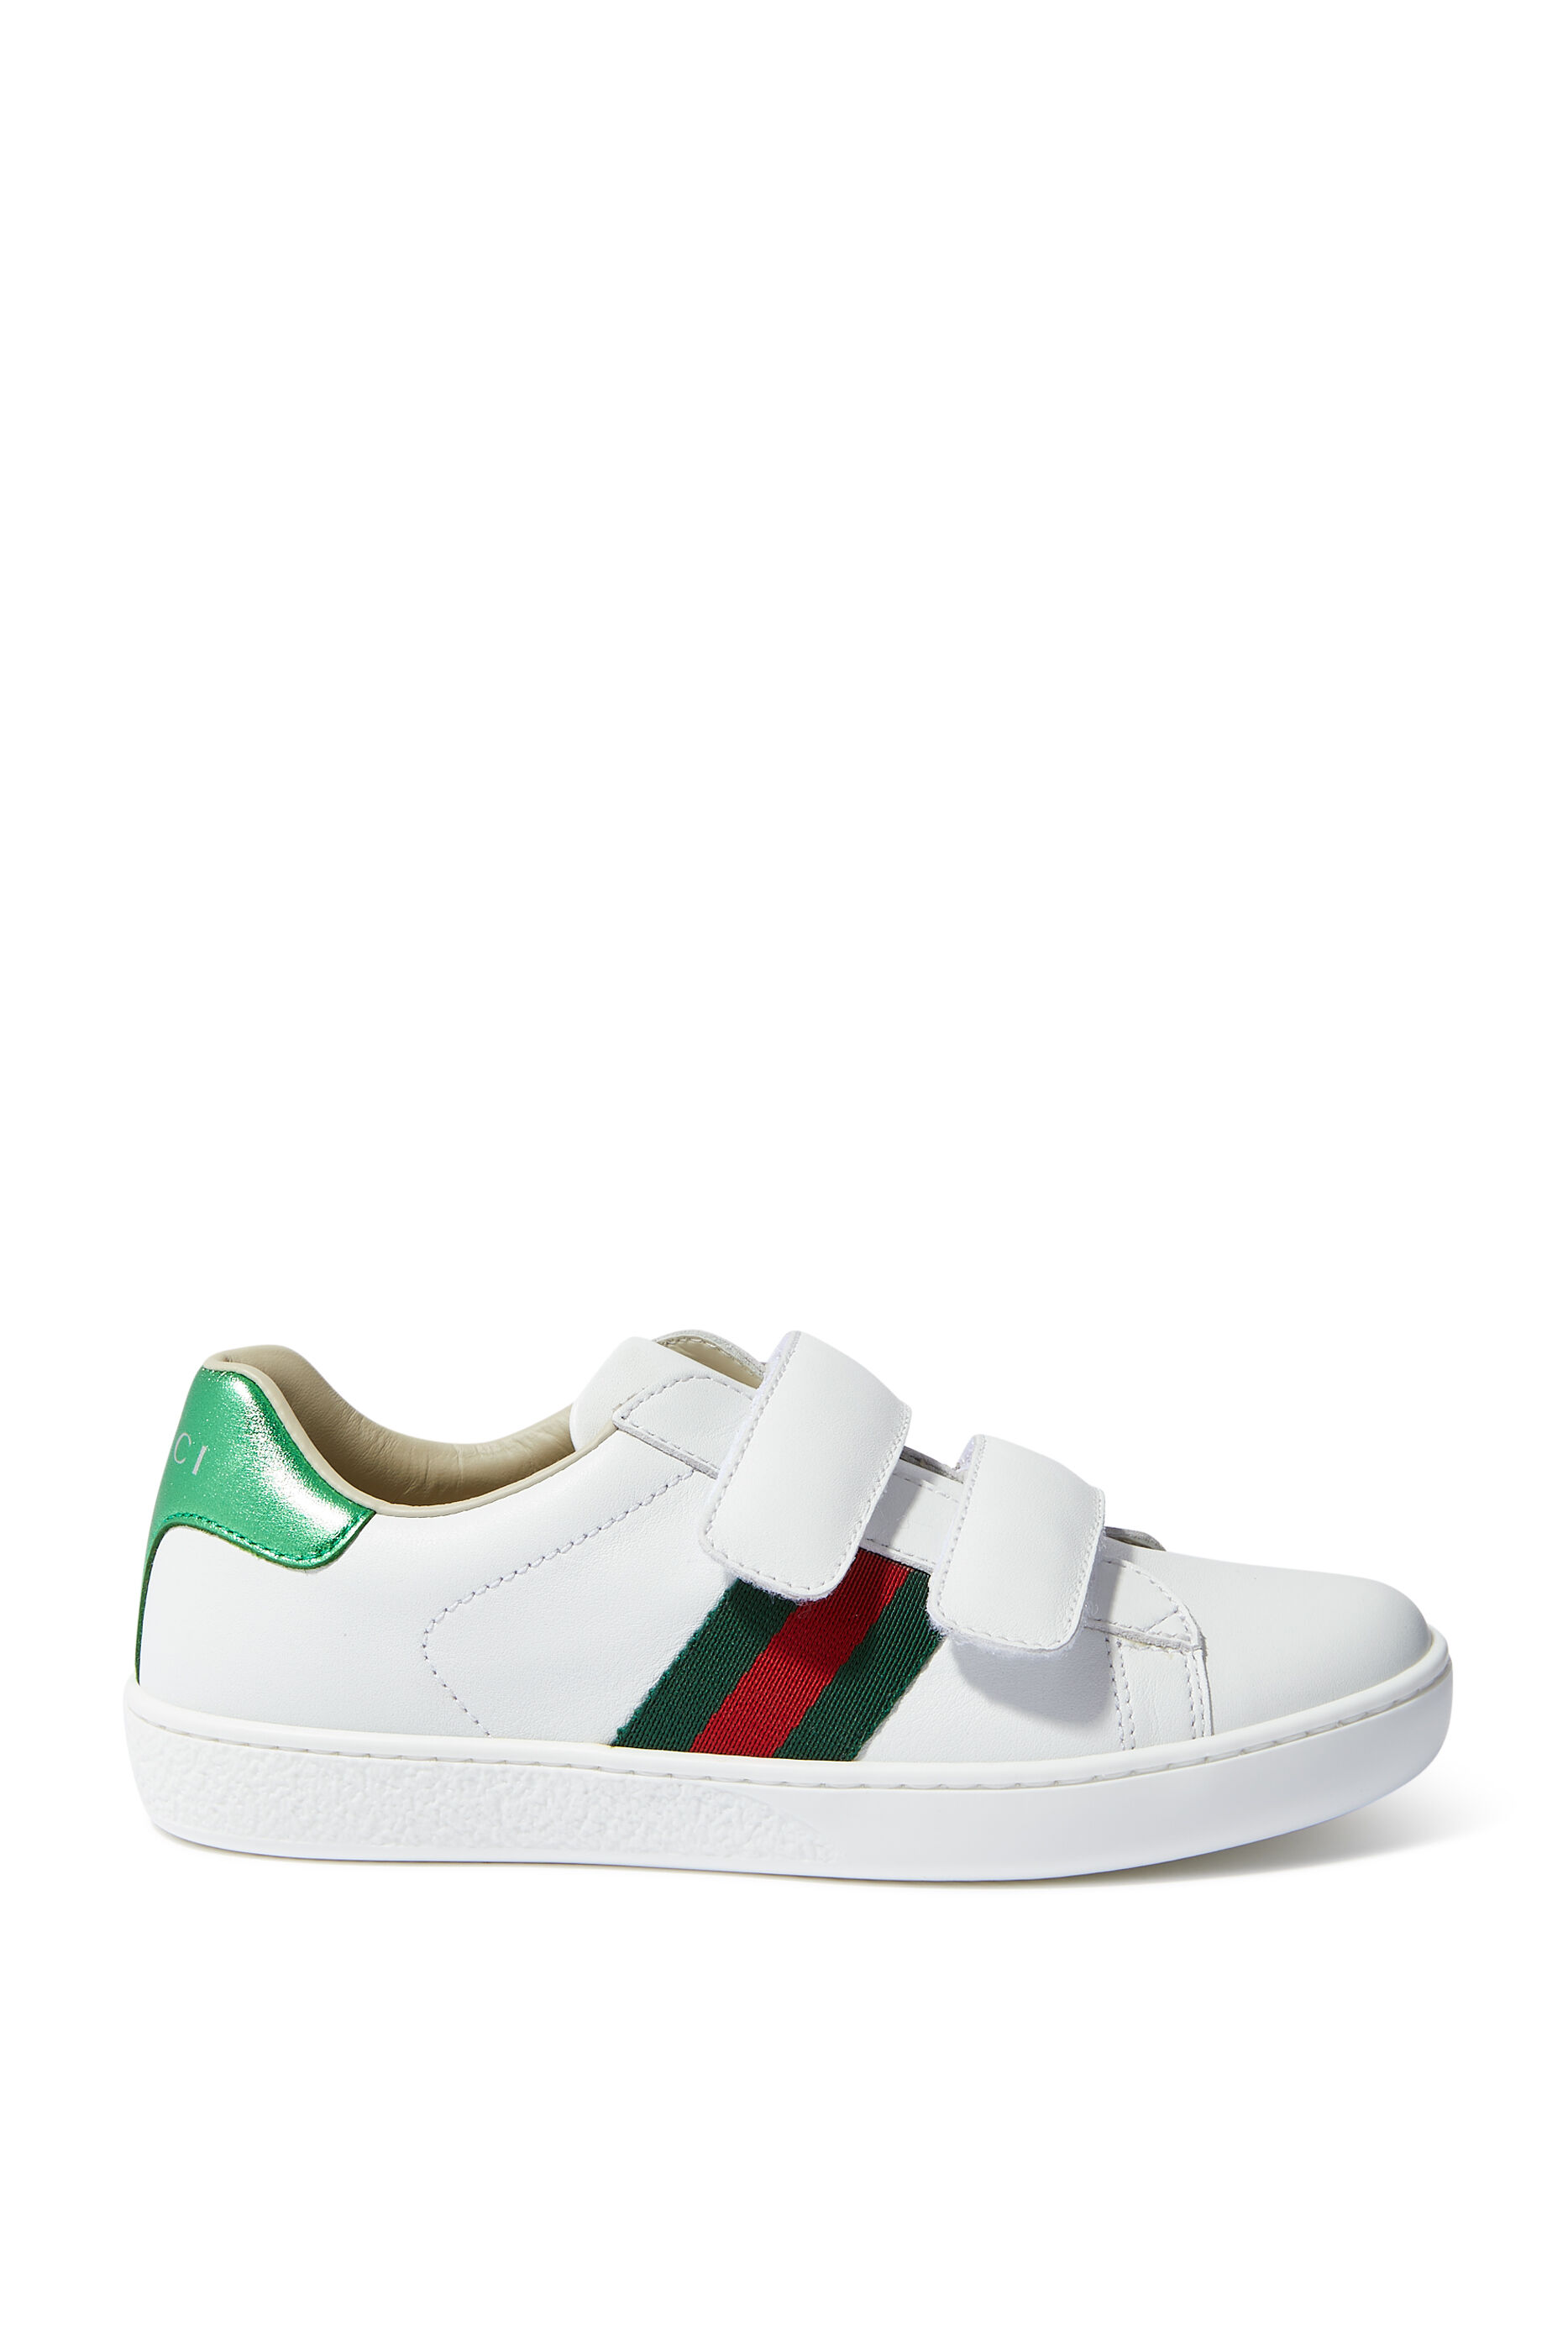 Buy Gucci Children's Ace Leather 